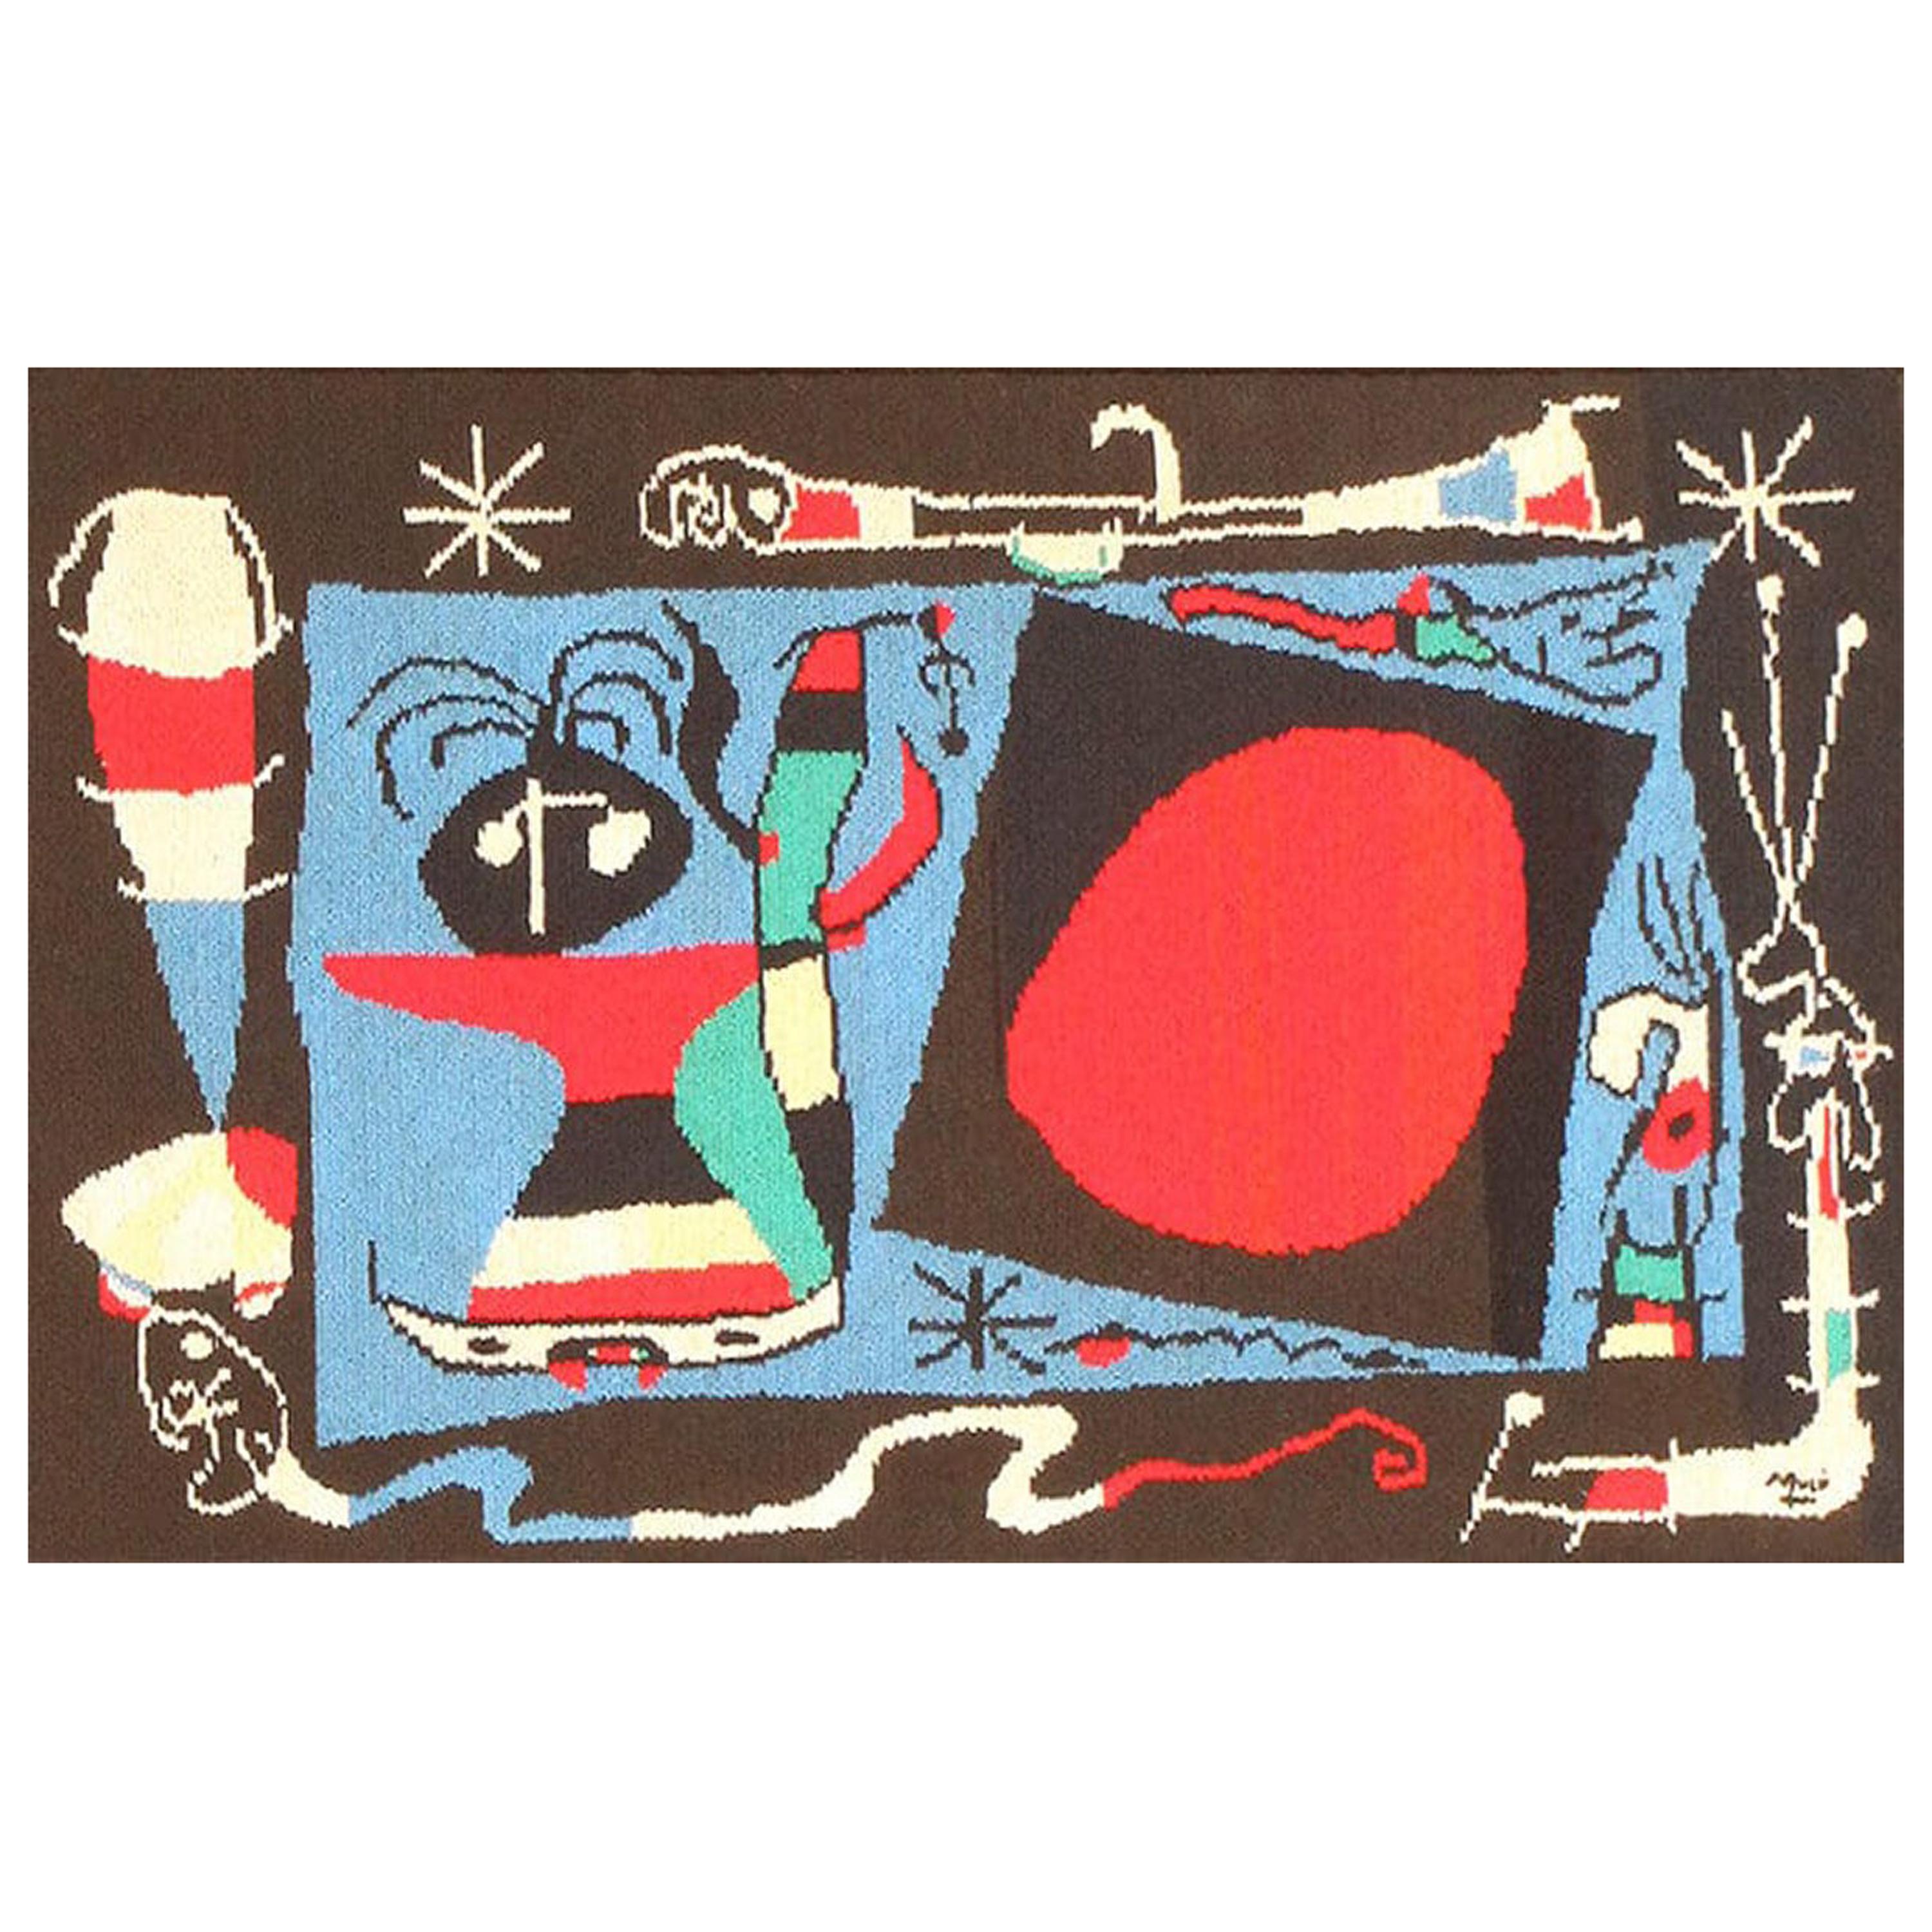 Vintage Joan Miró Tapestry Rug. Size: 2 ft 10 in x 1 ft 10 in (0.86 m x 0.56 m)